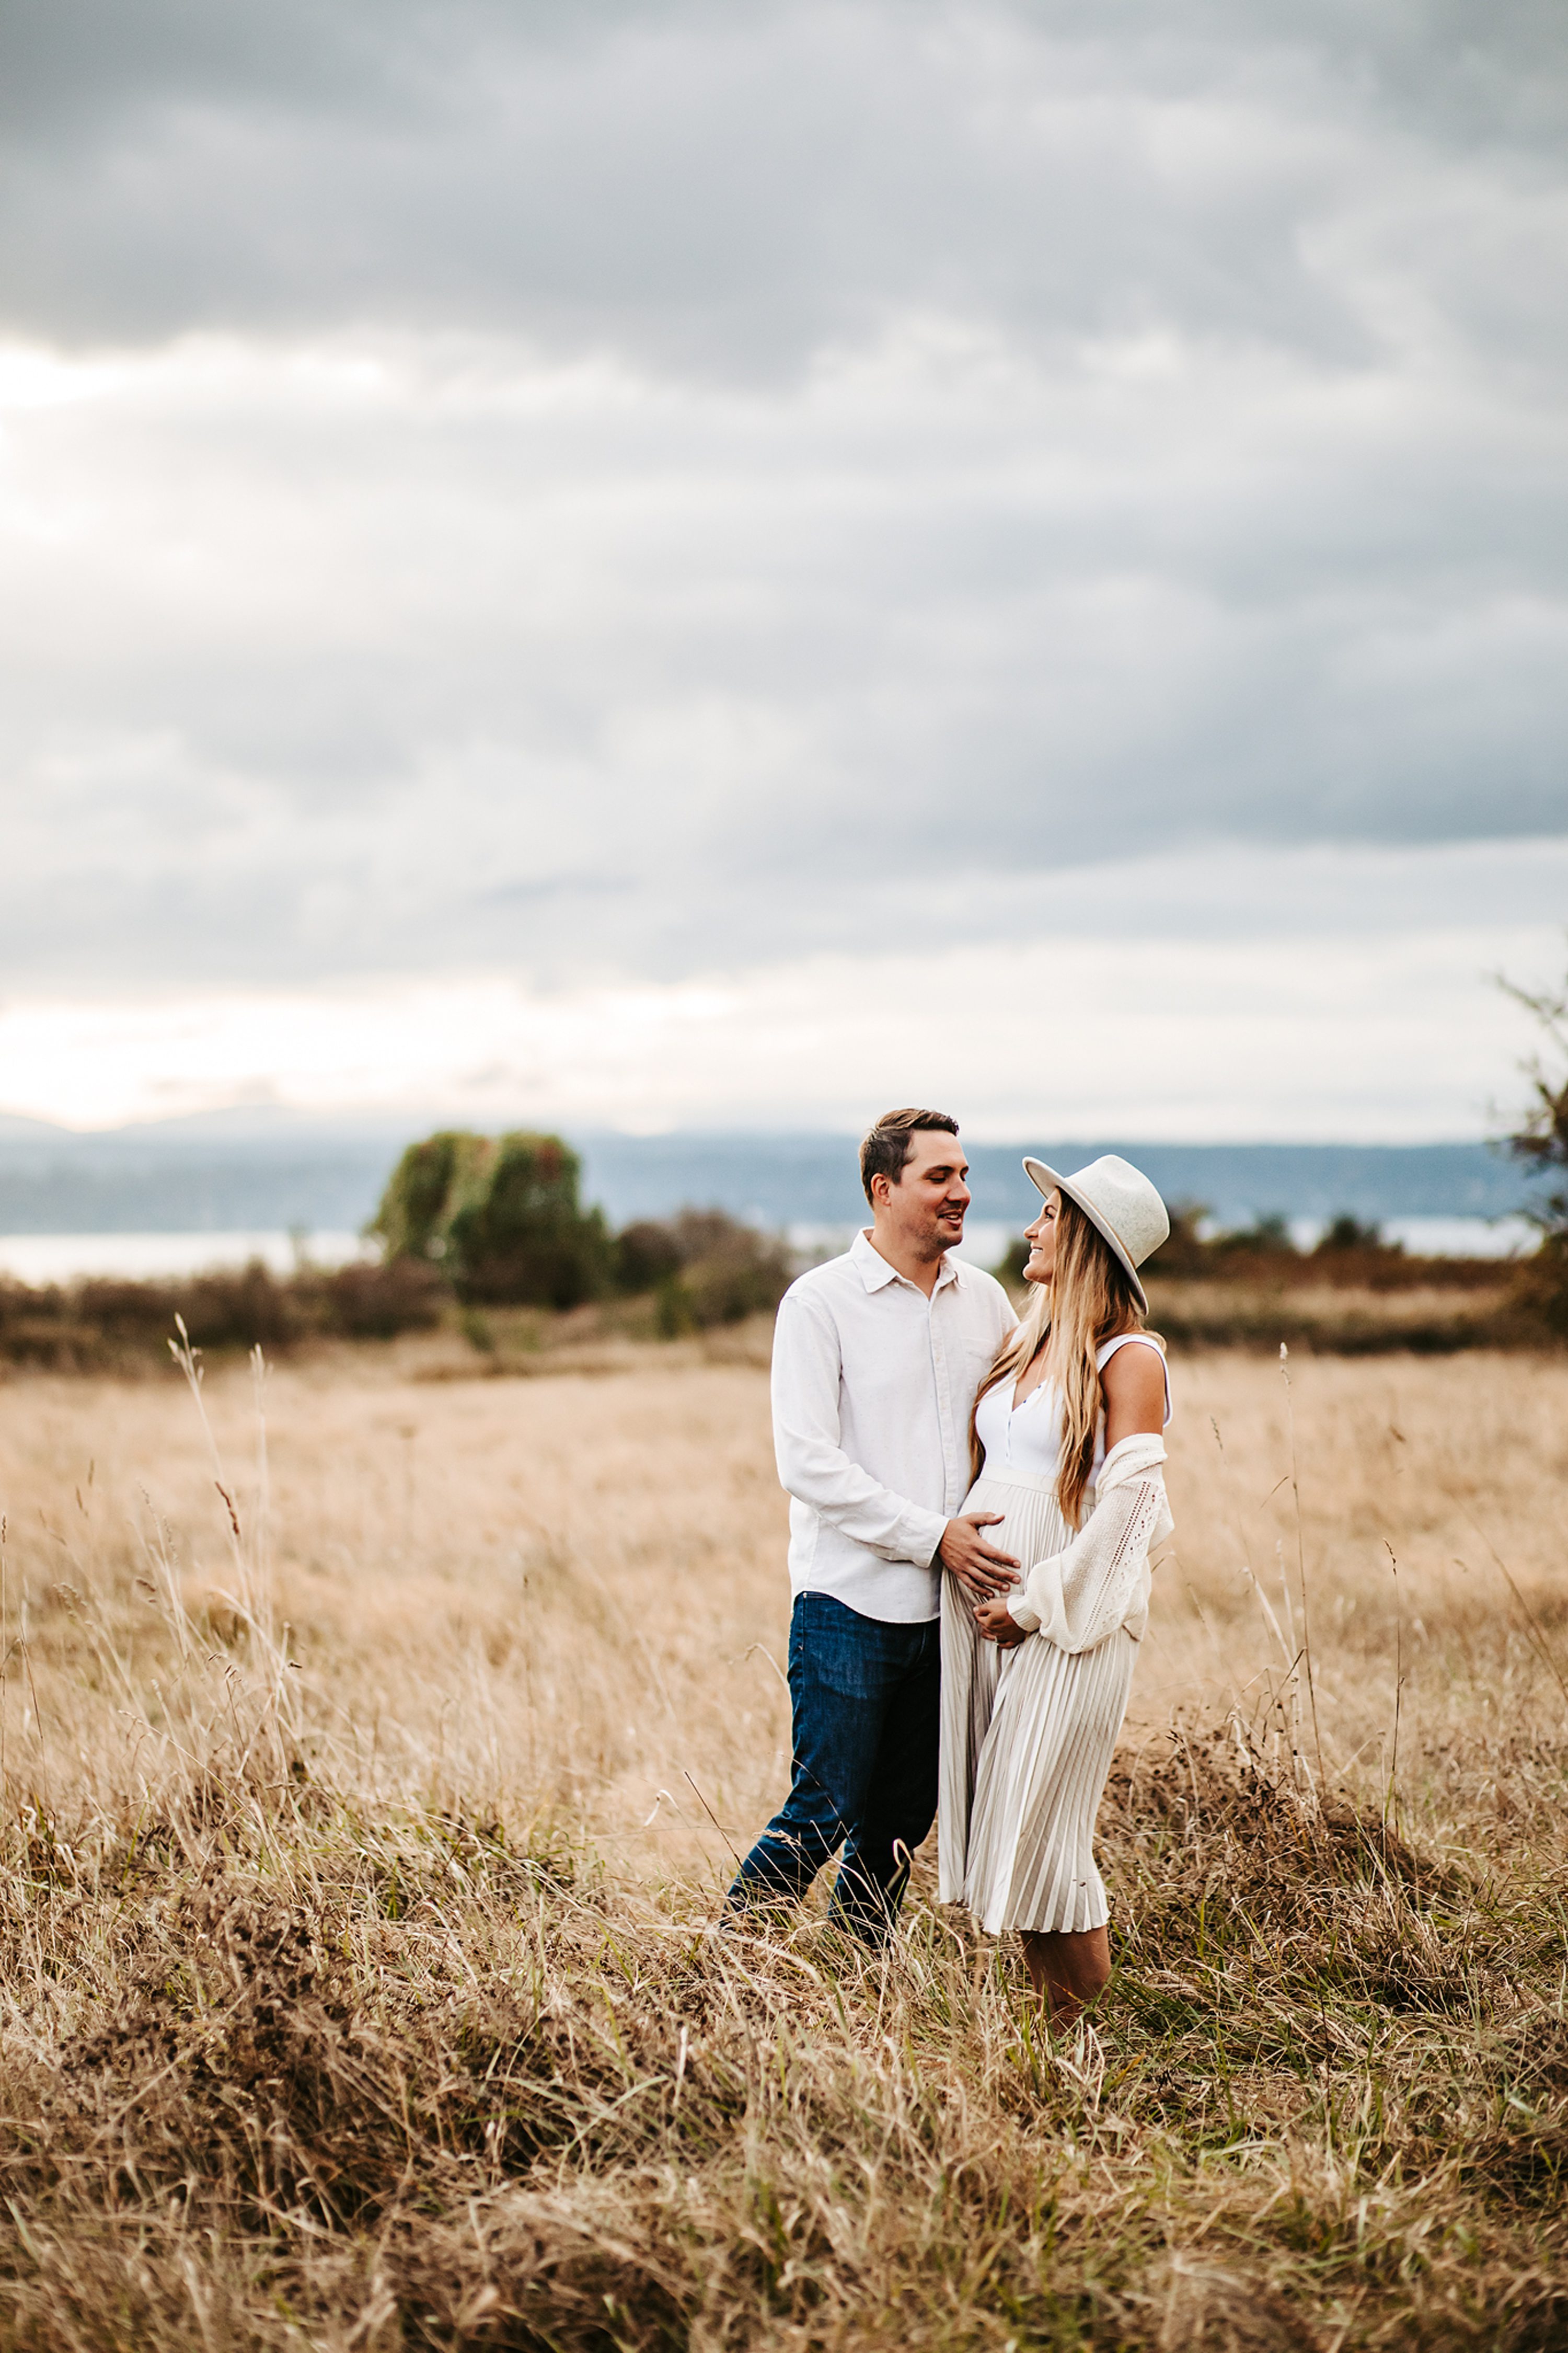  seattle maternity photographer,discovery park